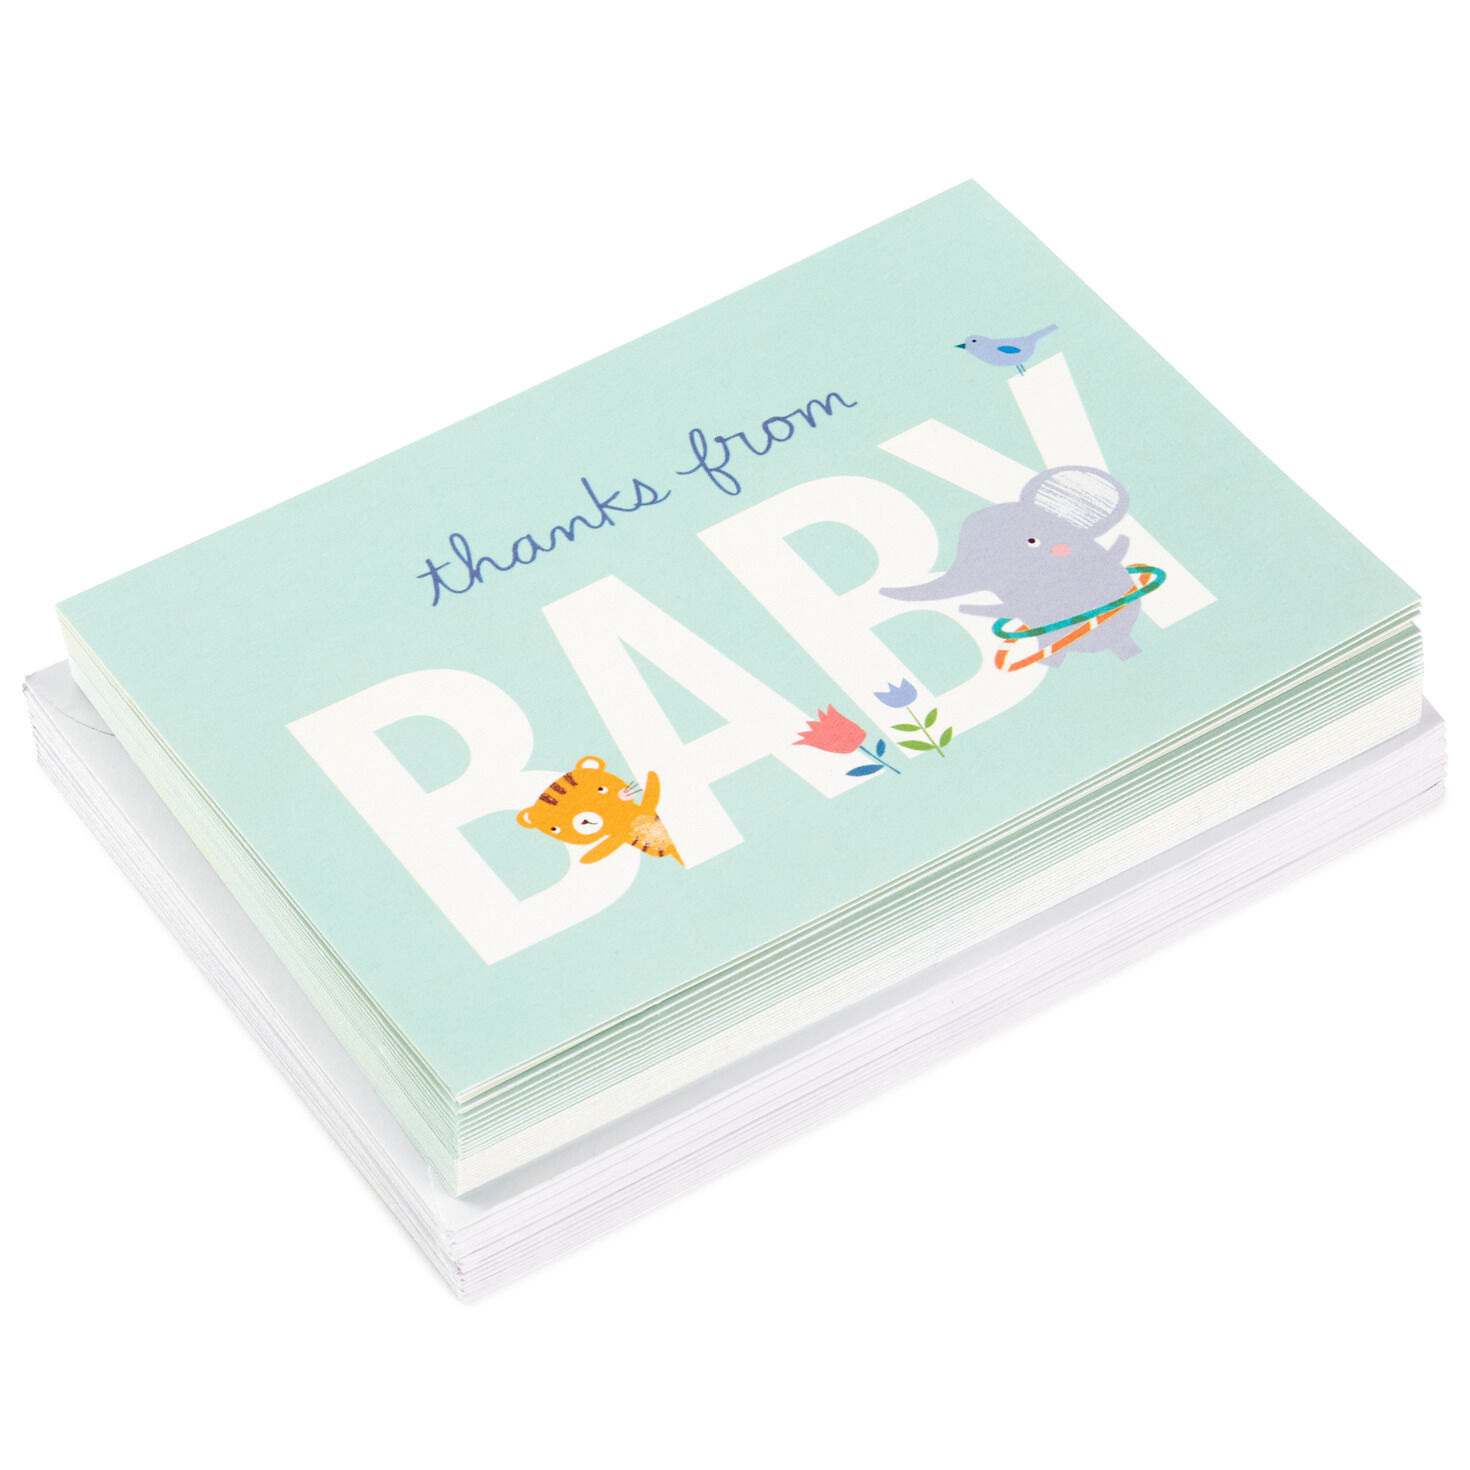 Happy Animals Blank Thank-You Notes, Pack of 24 for only USD 5.99 | Hallmark